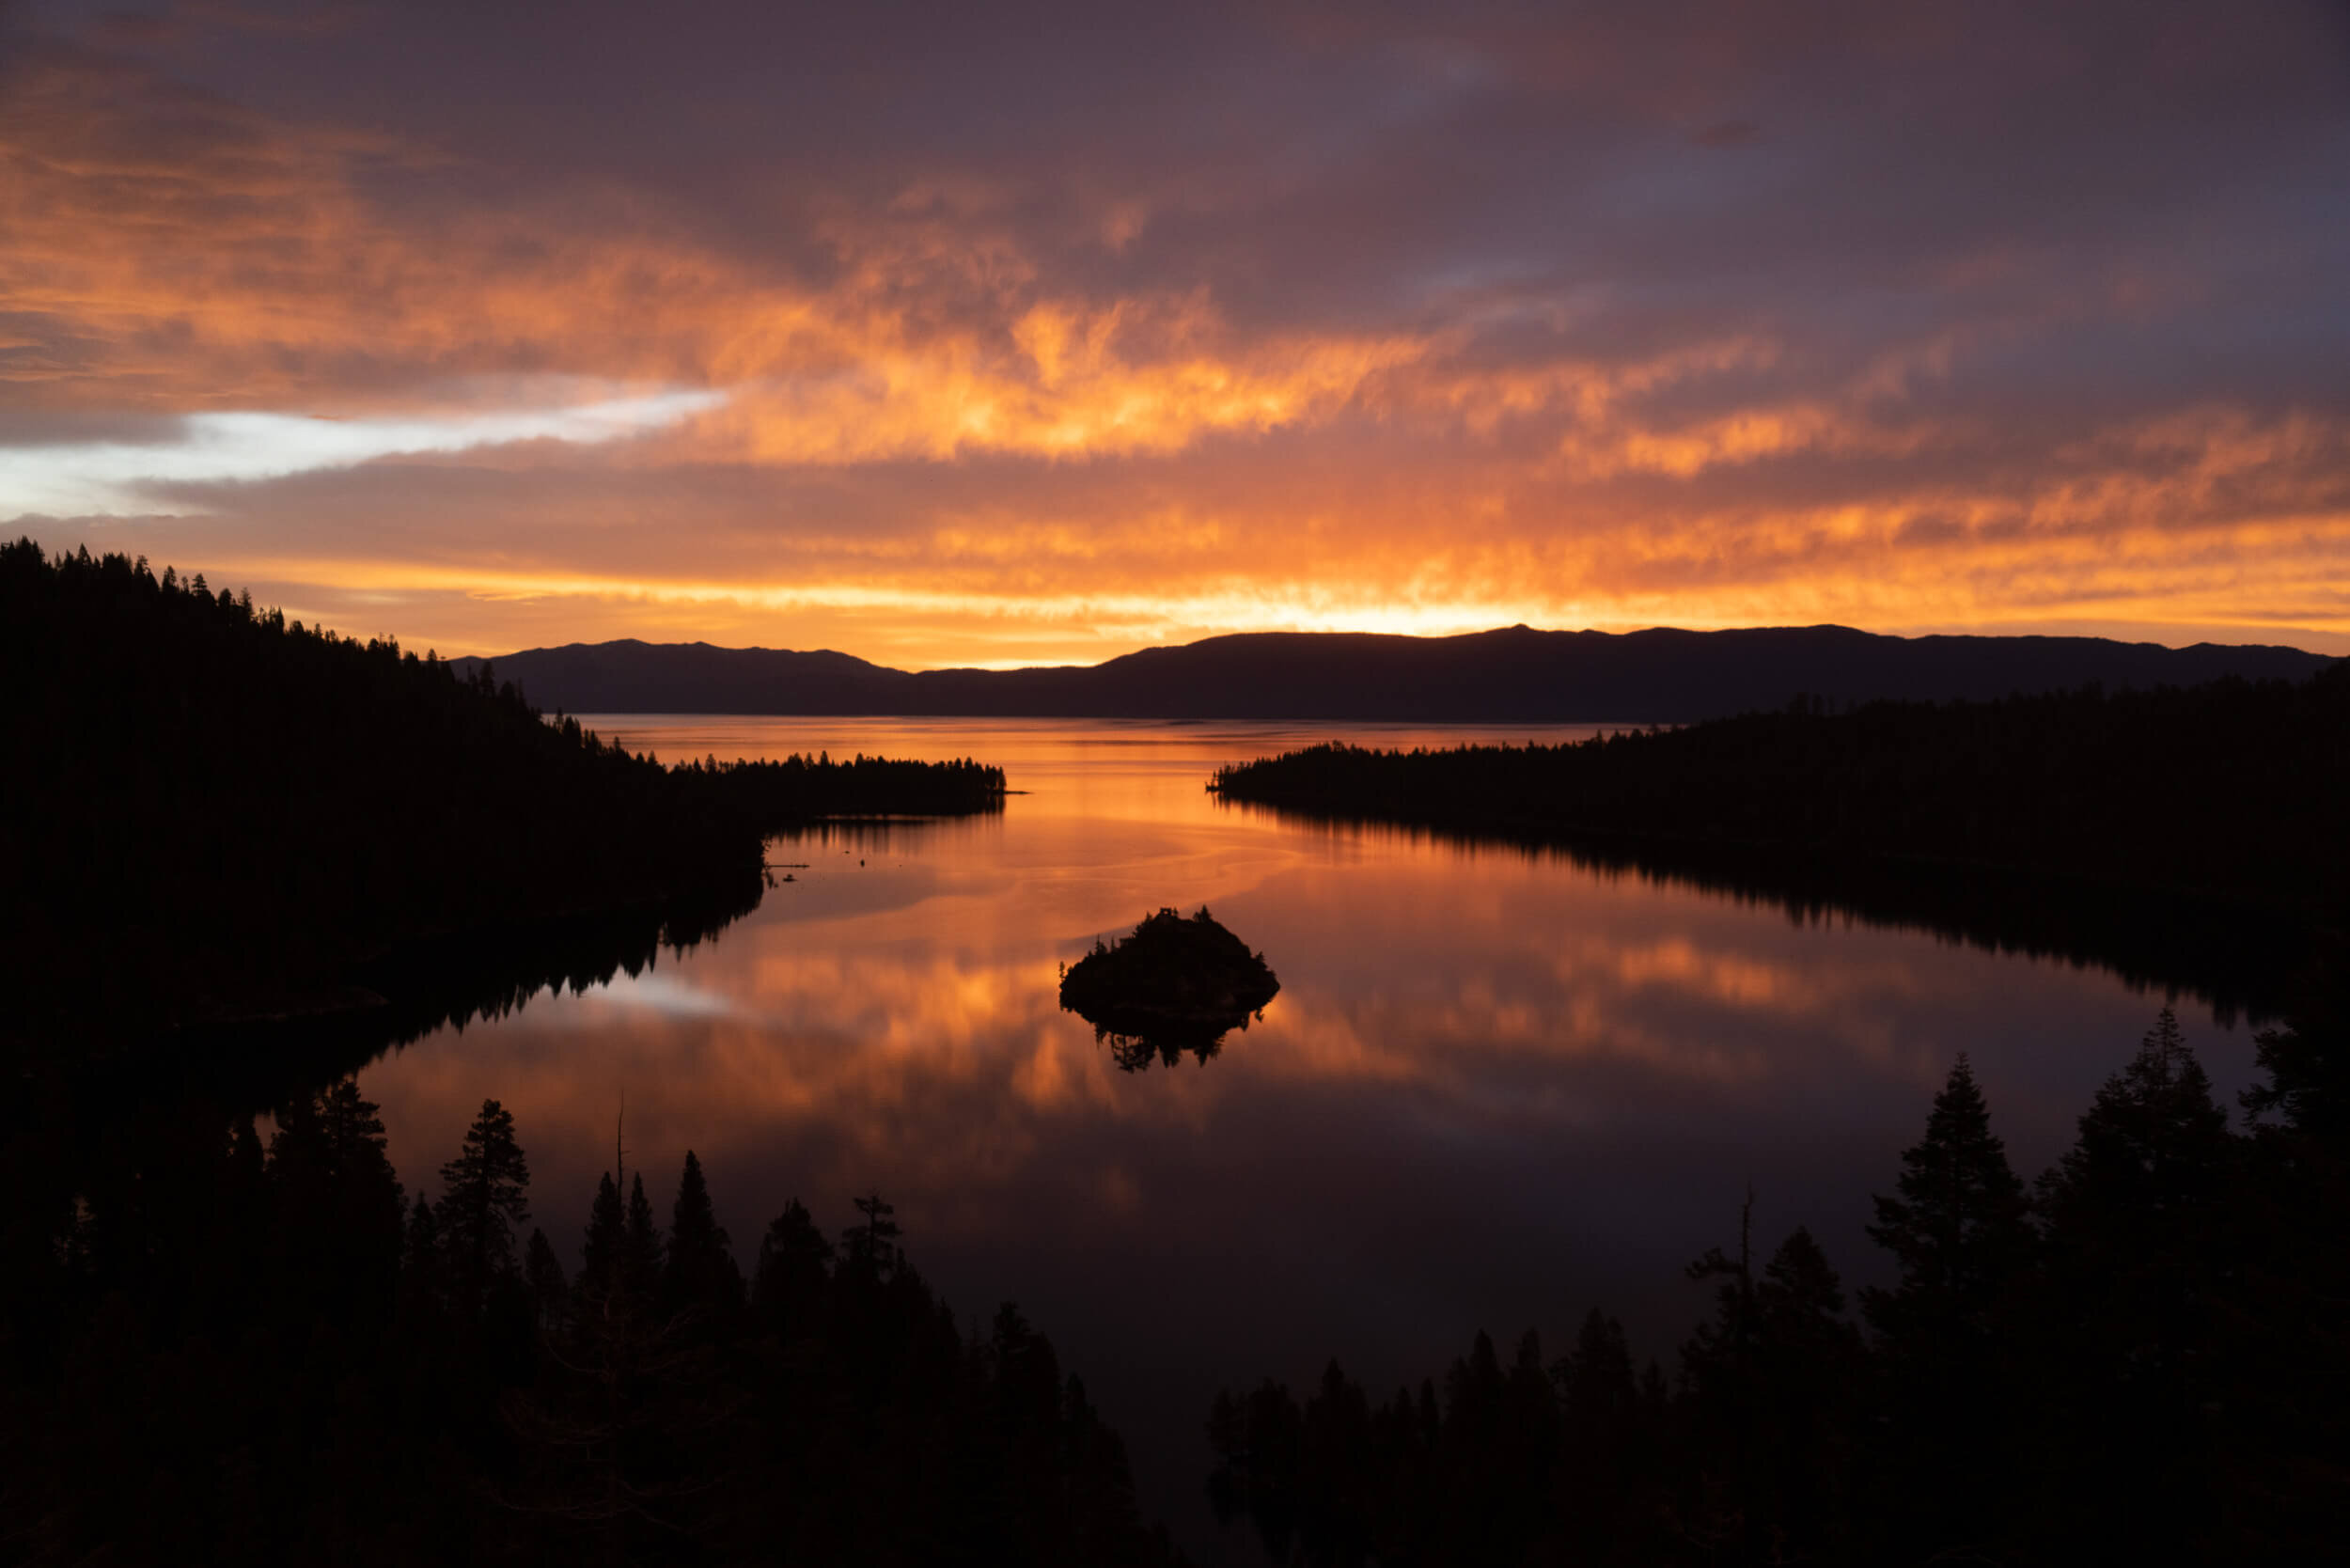 Sunrise on a calm day at Emerald Bay in Lake Tahoe.